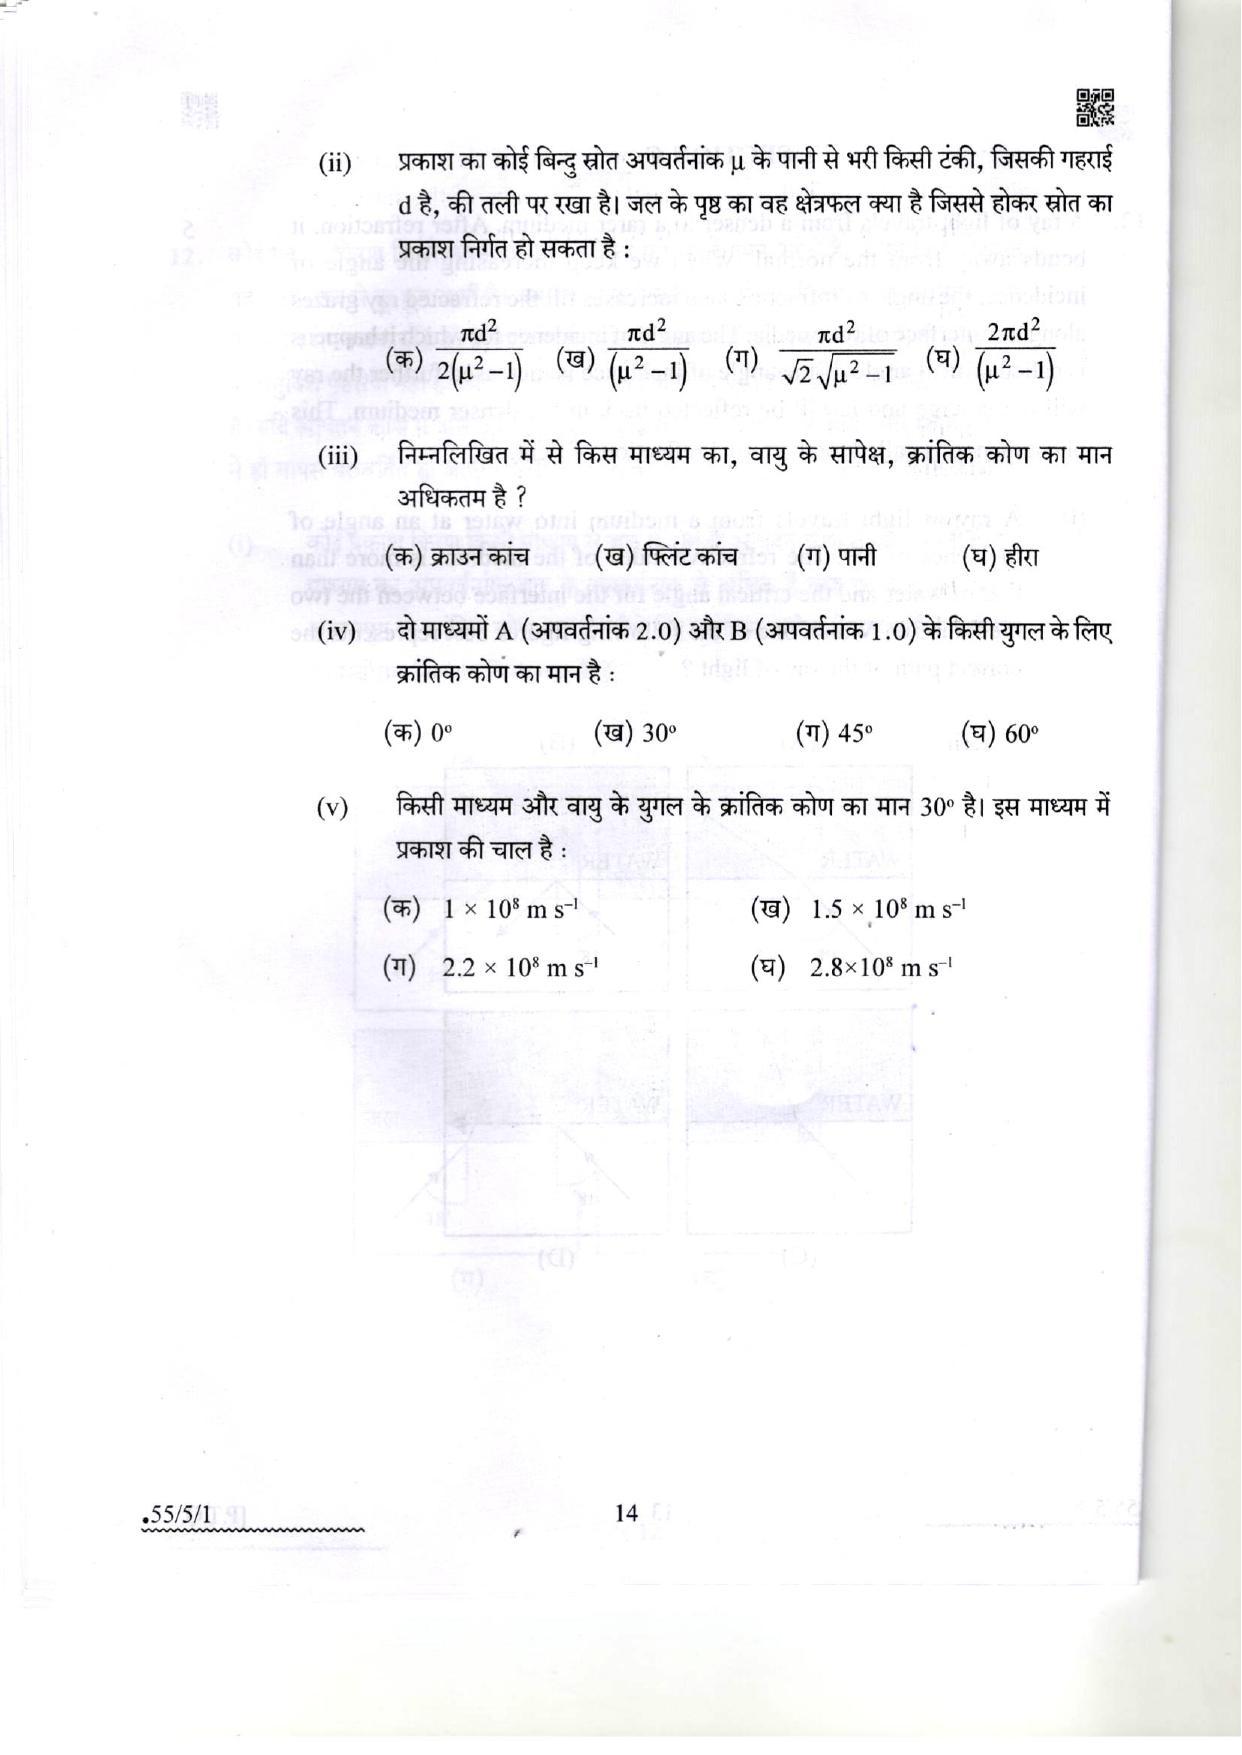 CBSE Class 12 55-5-1 Physics 2022 Question Paper - Page 14